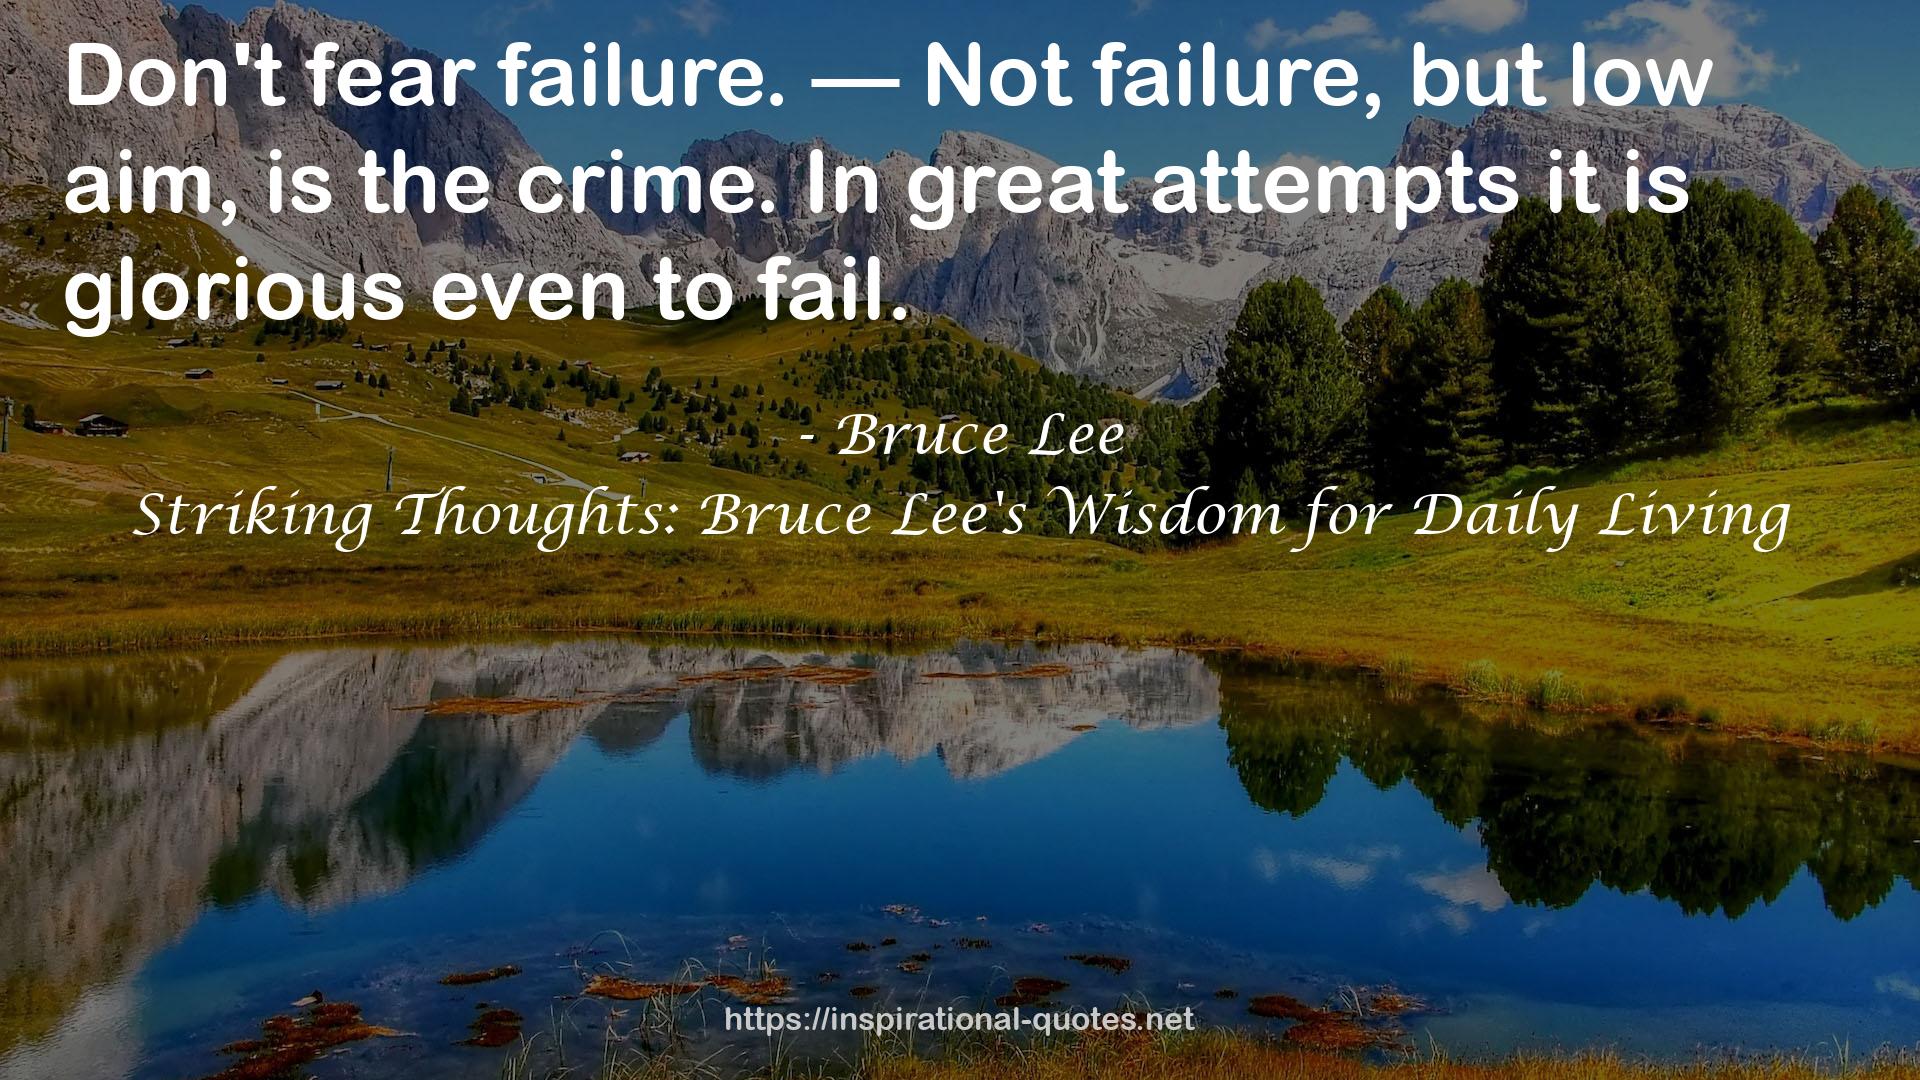 Striking Thoughts: Bruce Lee's Wisdom for Daily Living QUOTES